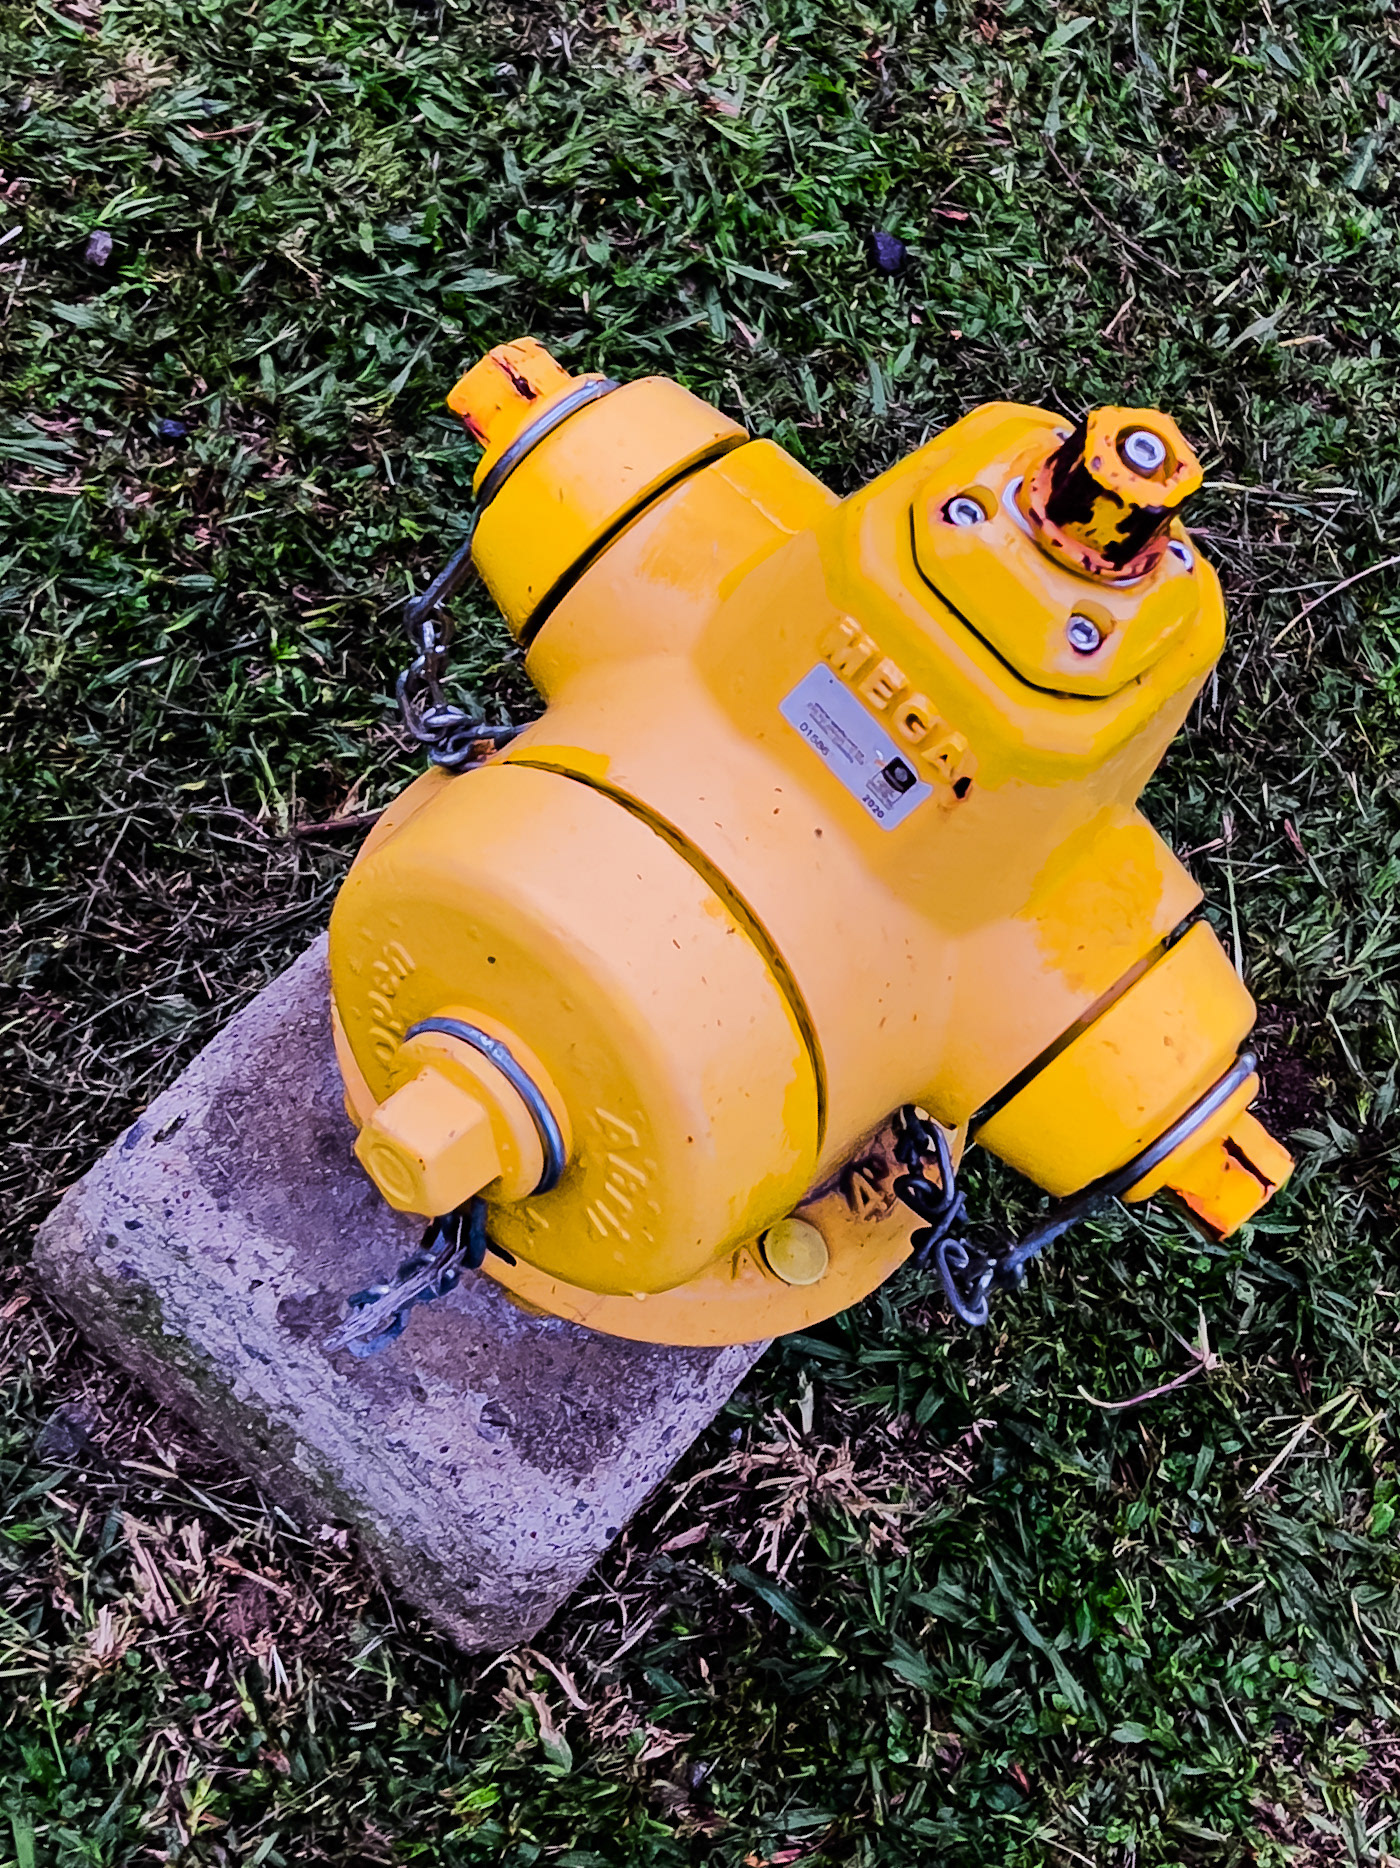 Image may contain: yellow, outdoor object and hydrant